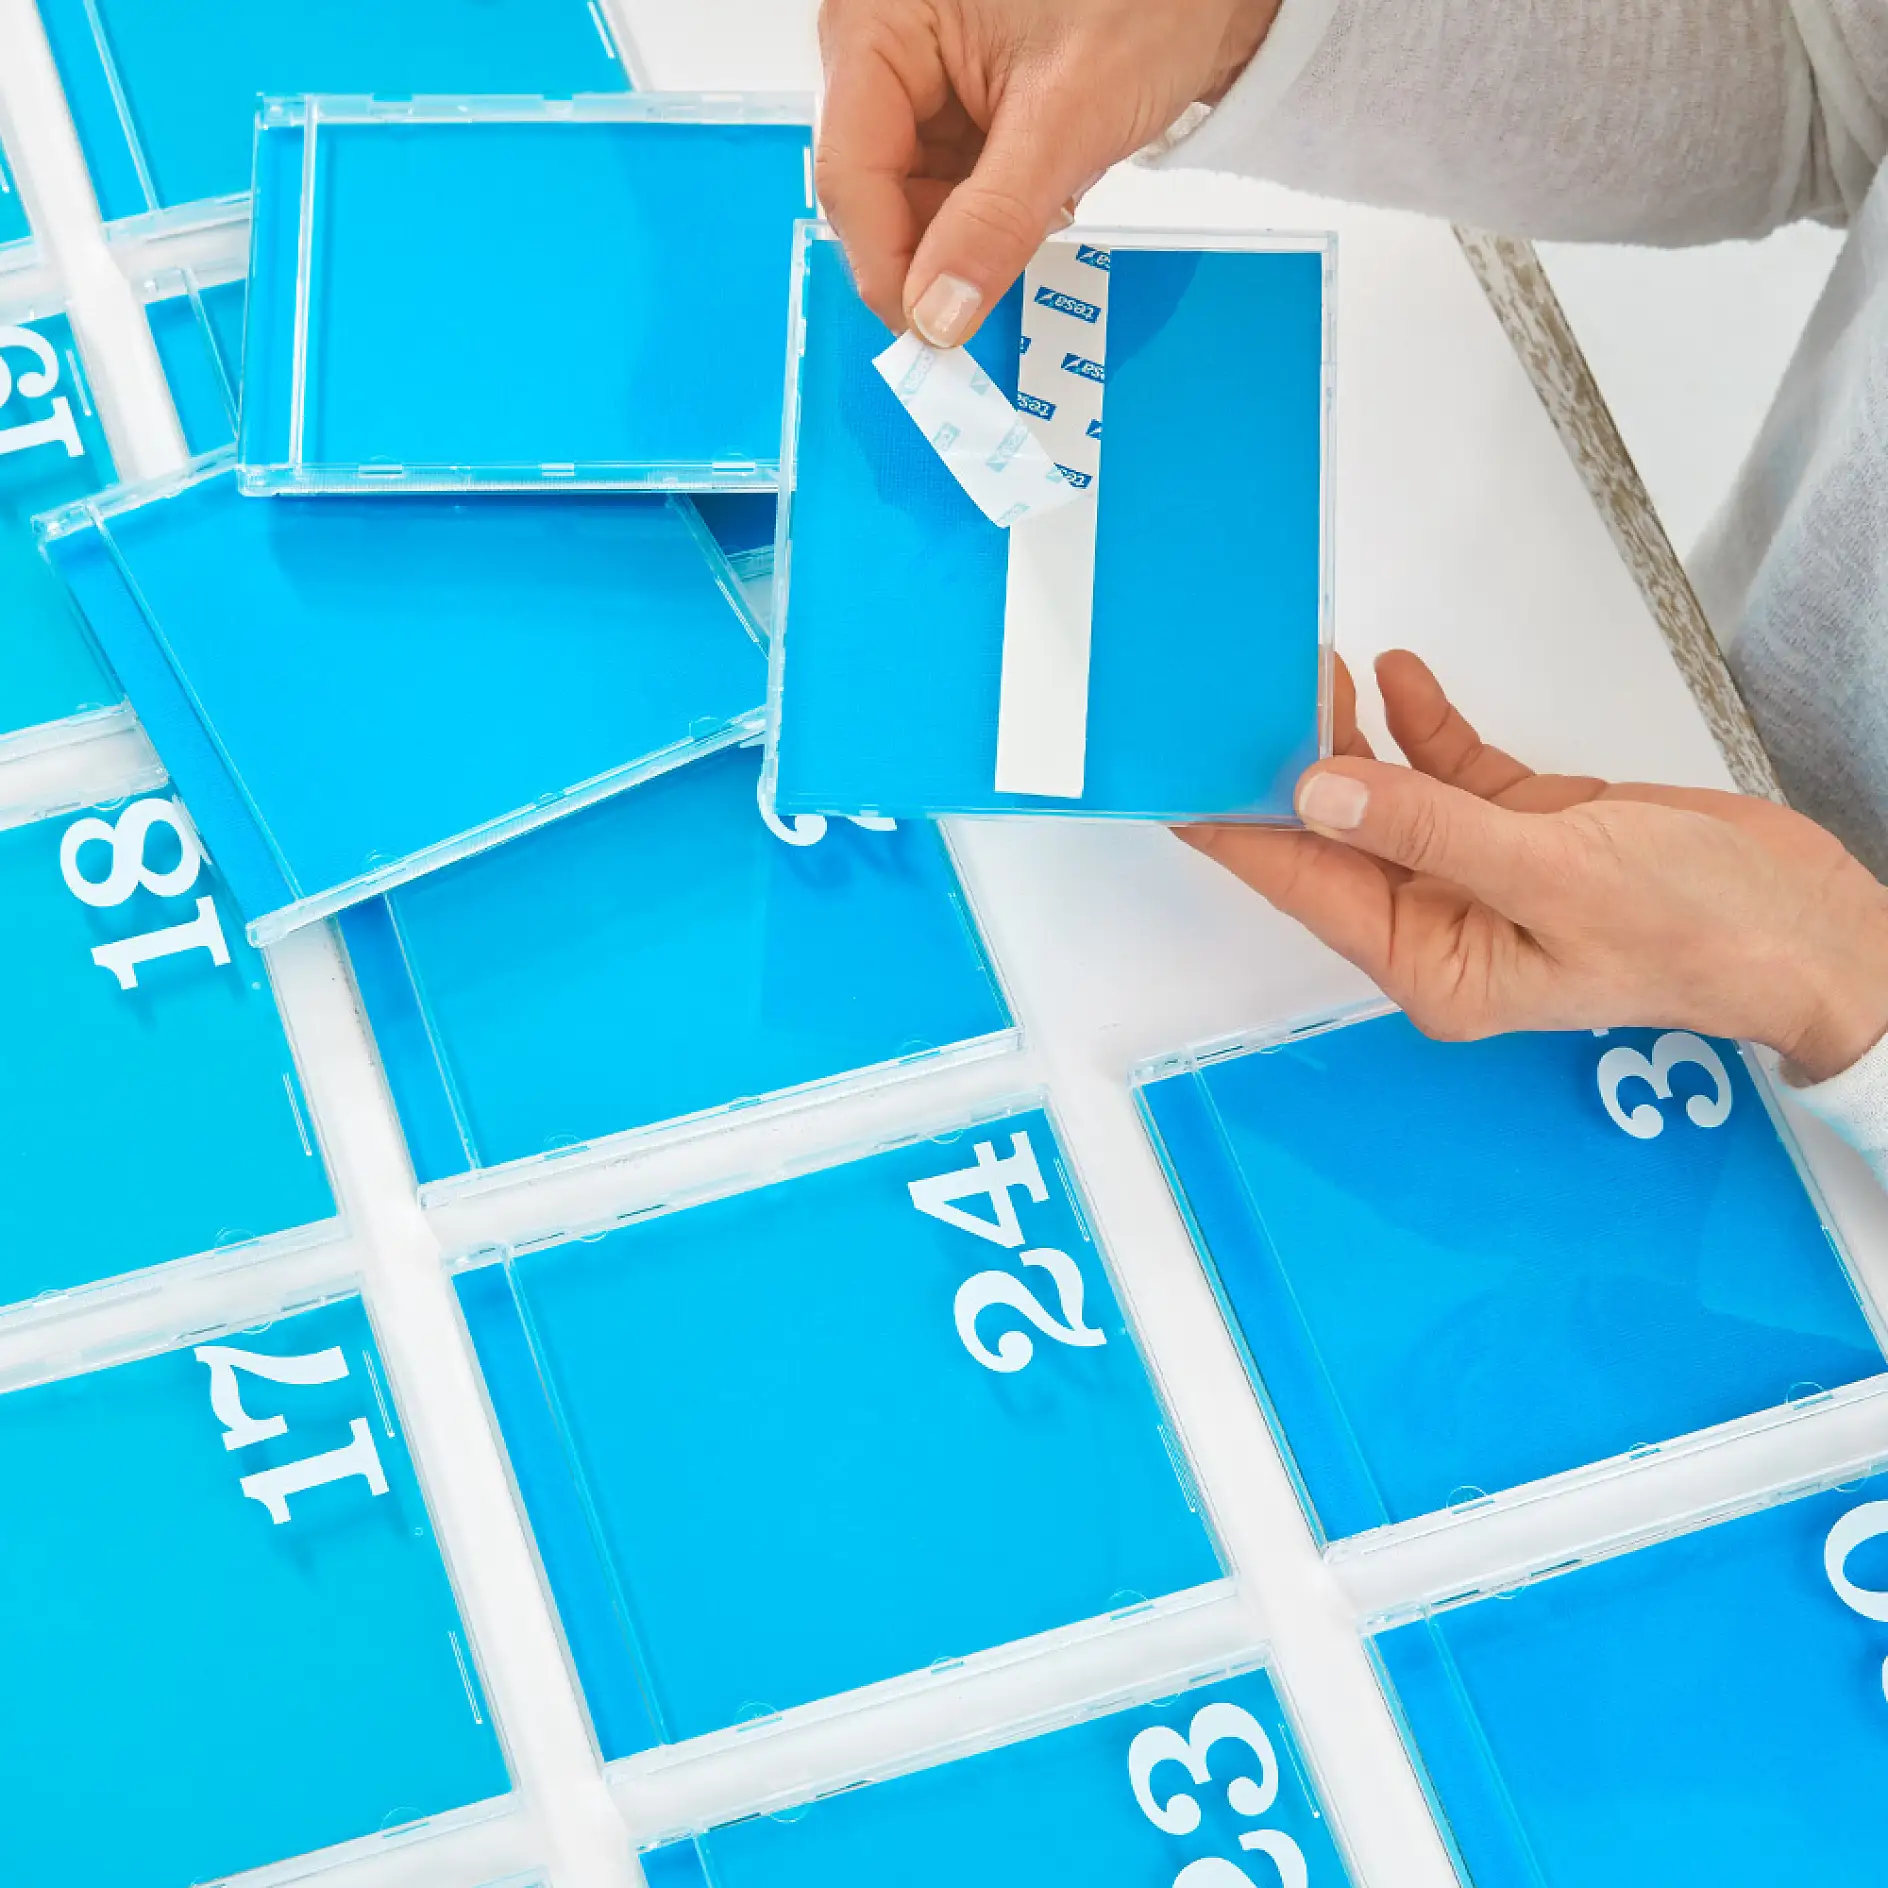 Making a DIY calendar – removing the backing from tesa® Mounting Tape for Tiles & Metal